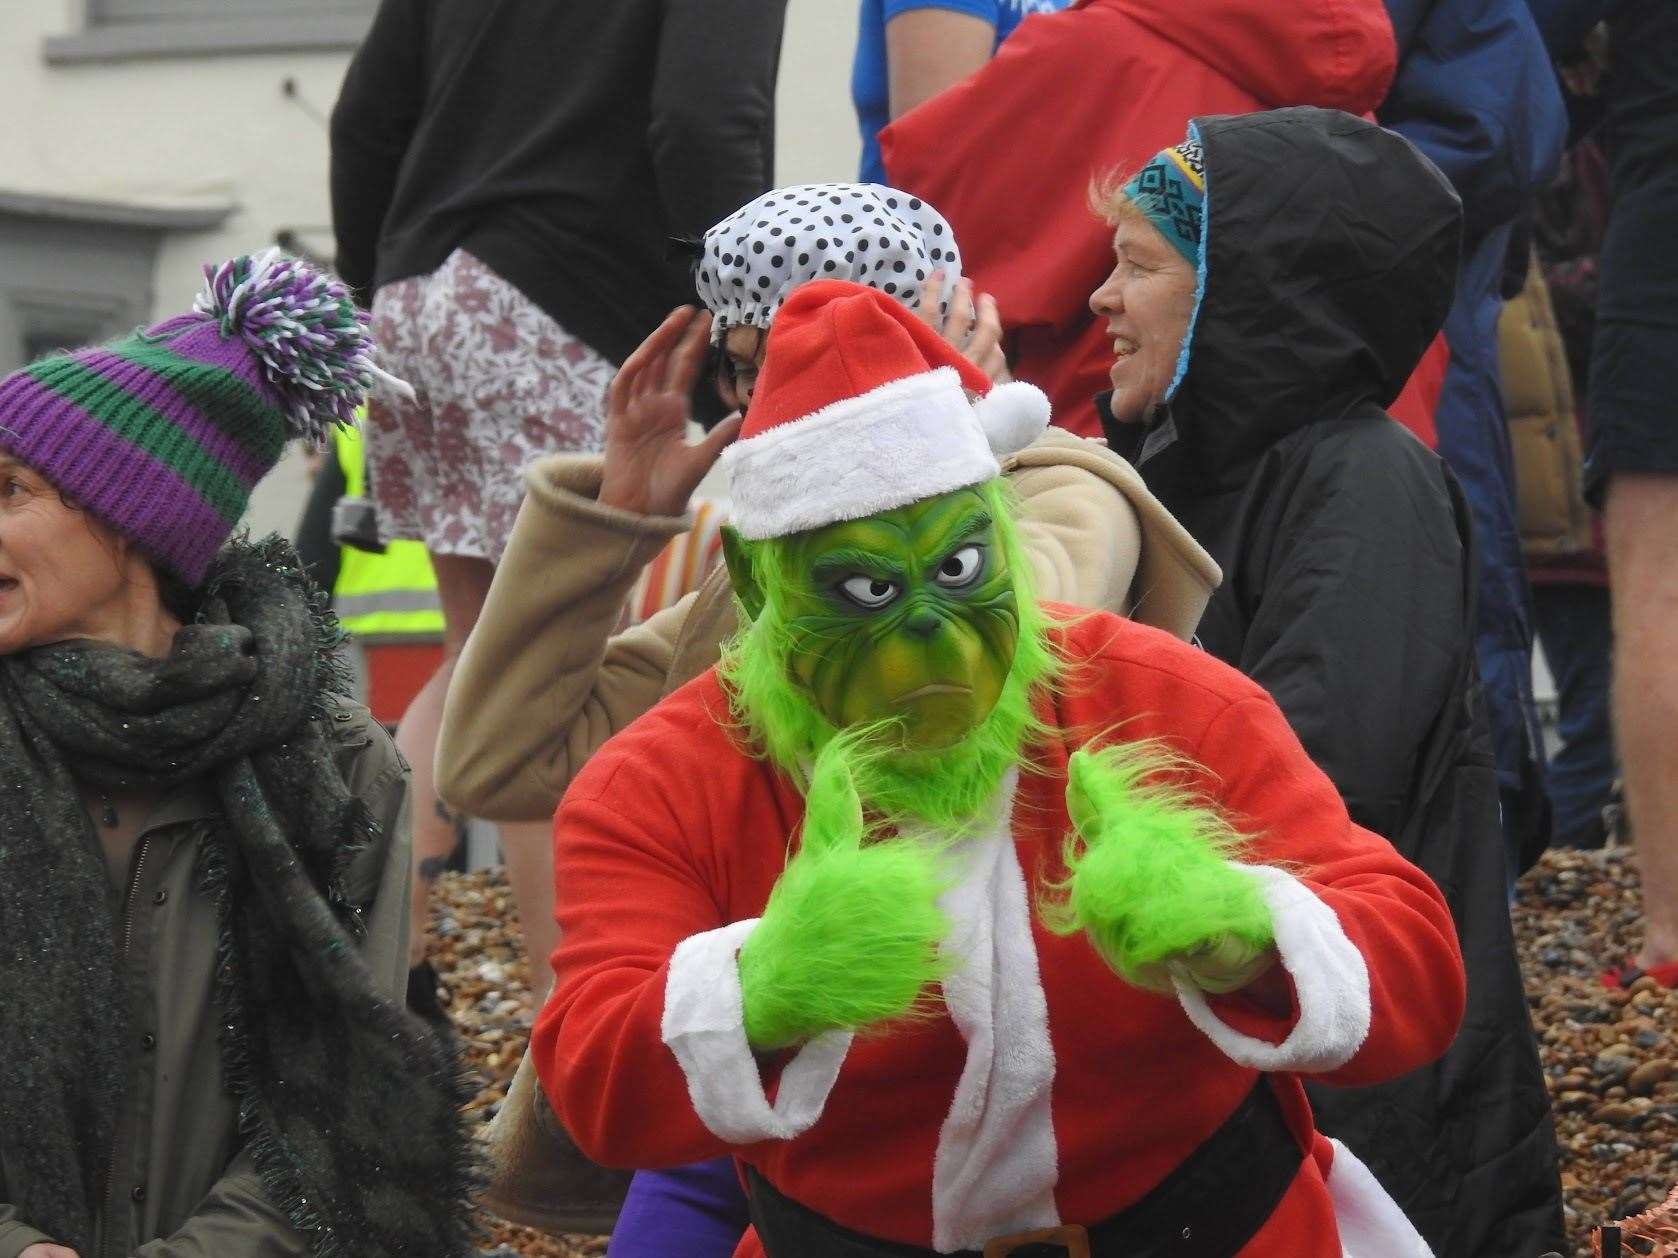 It even attracted the attention of The Grinch. Picture: The Unofficial Photographer